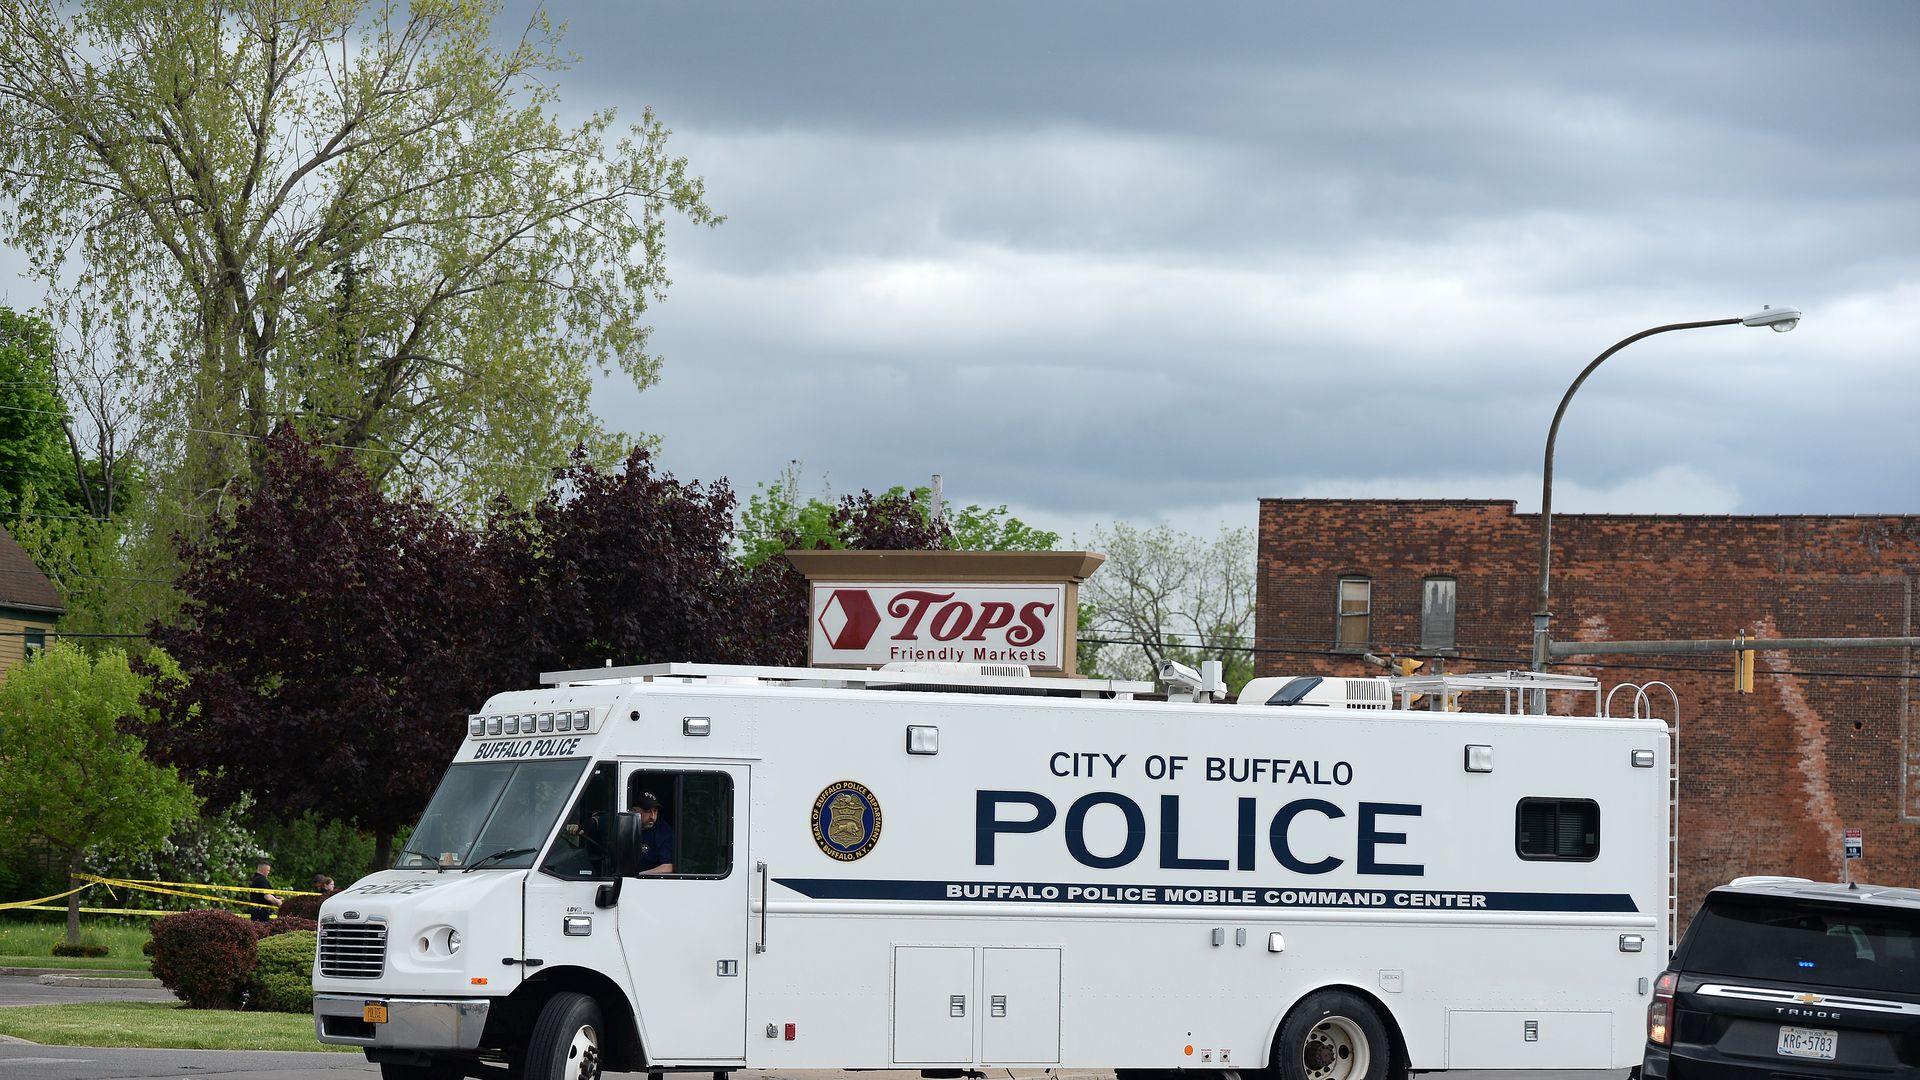 A police mobile command center sits in front of the Tops market in Buffalo, N.Y., that was the site of a mass shooting.